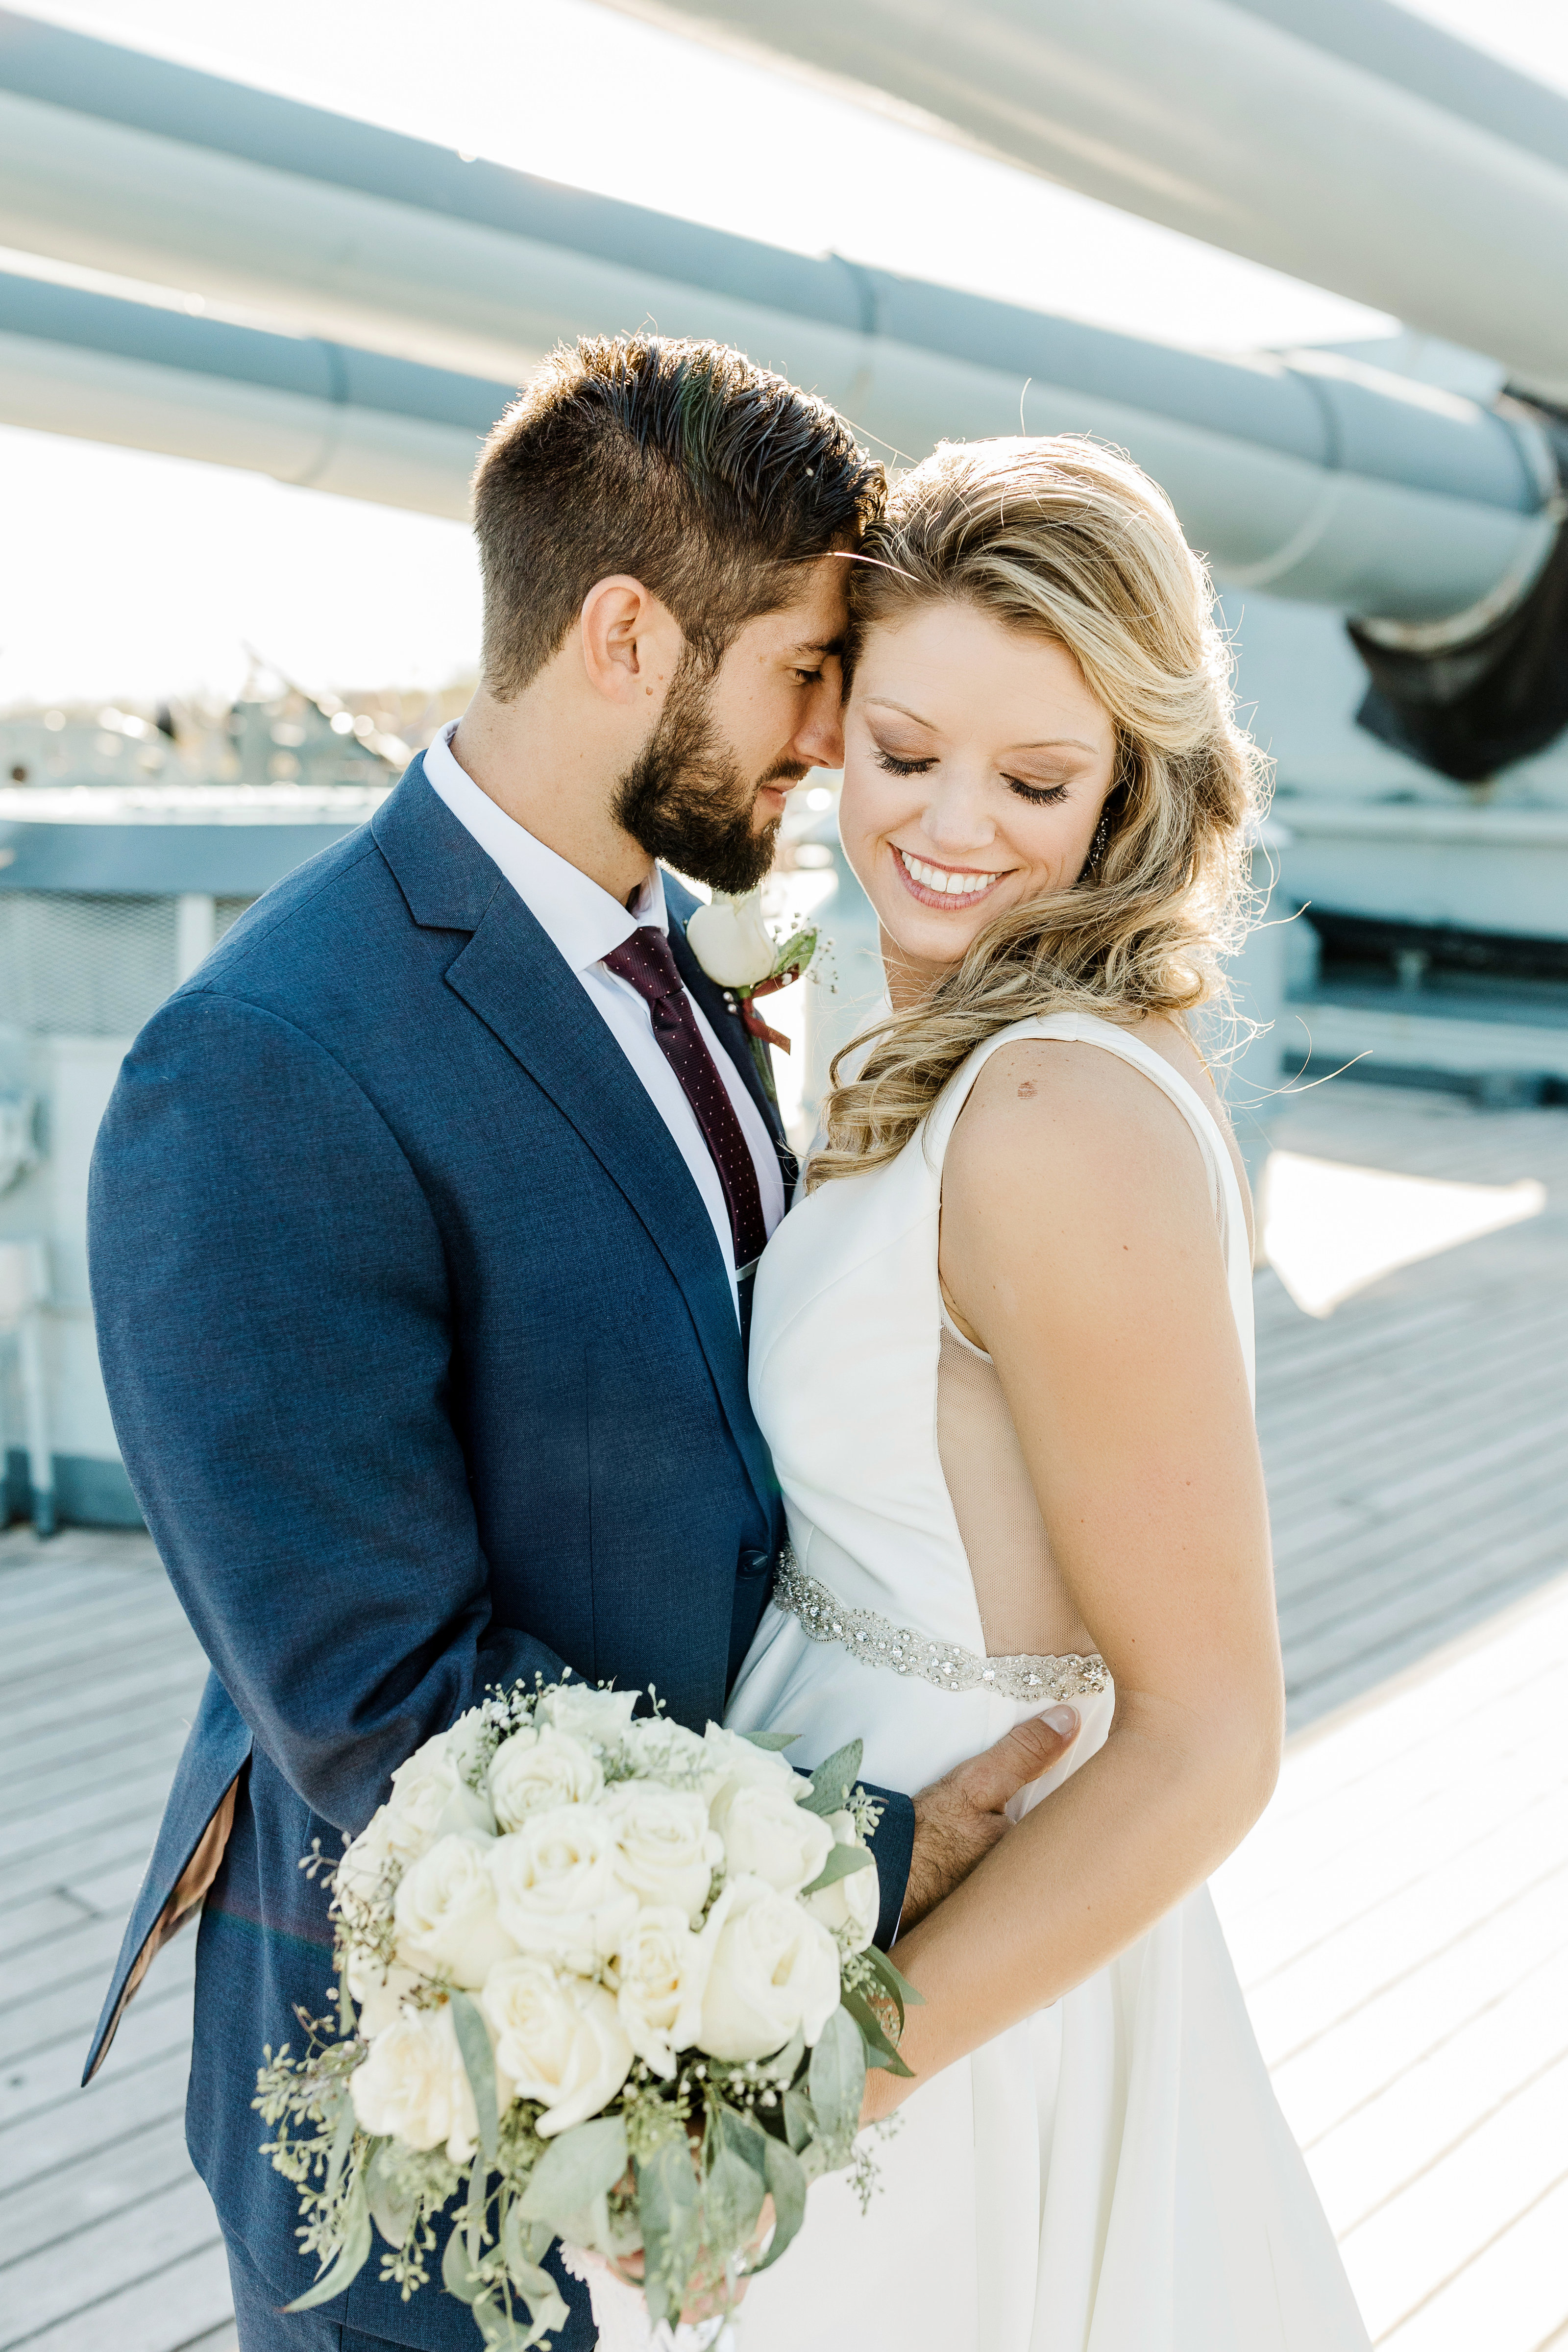 Wedding couples photos takwn on the USS North Carolina in downtown Wilmington